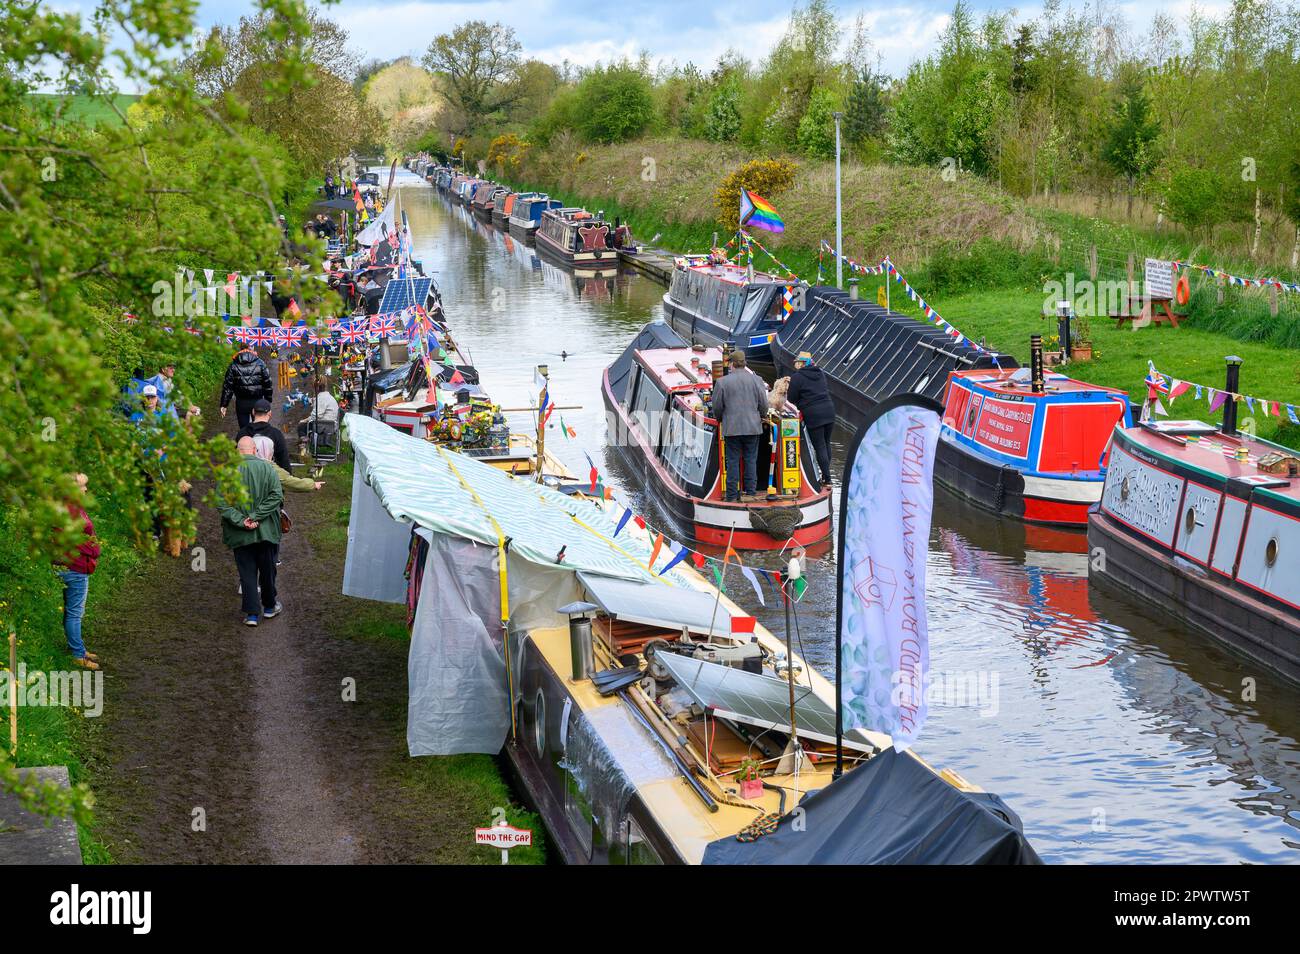 Boat traders selling gifts and other items from narrowboats attending the Norbury Canal Festival on the Shropshire Union Canal in Staffordshire. Stock Photo